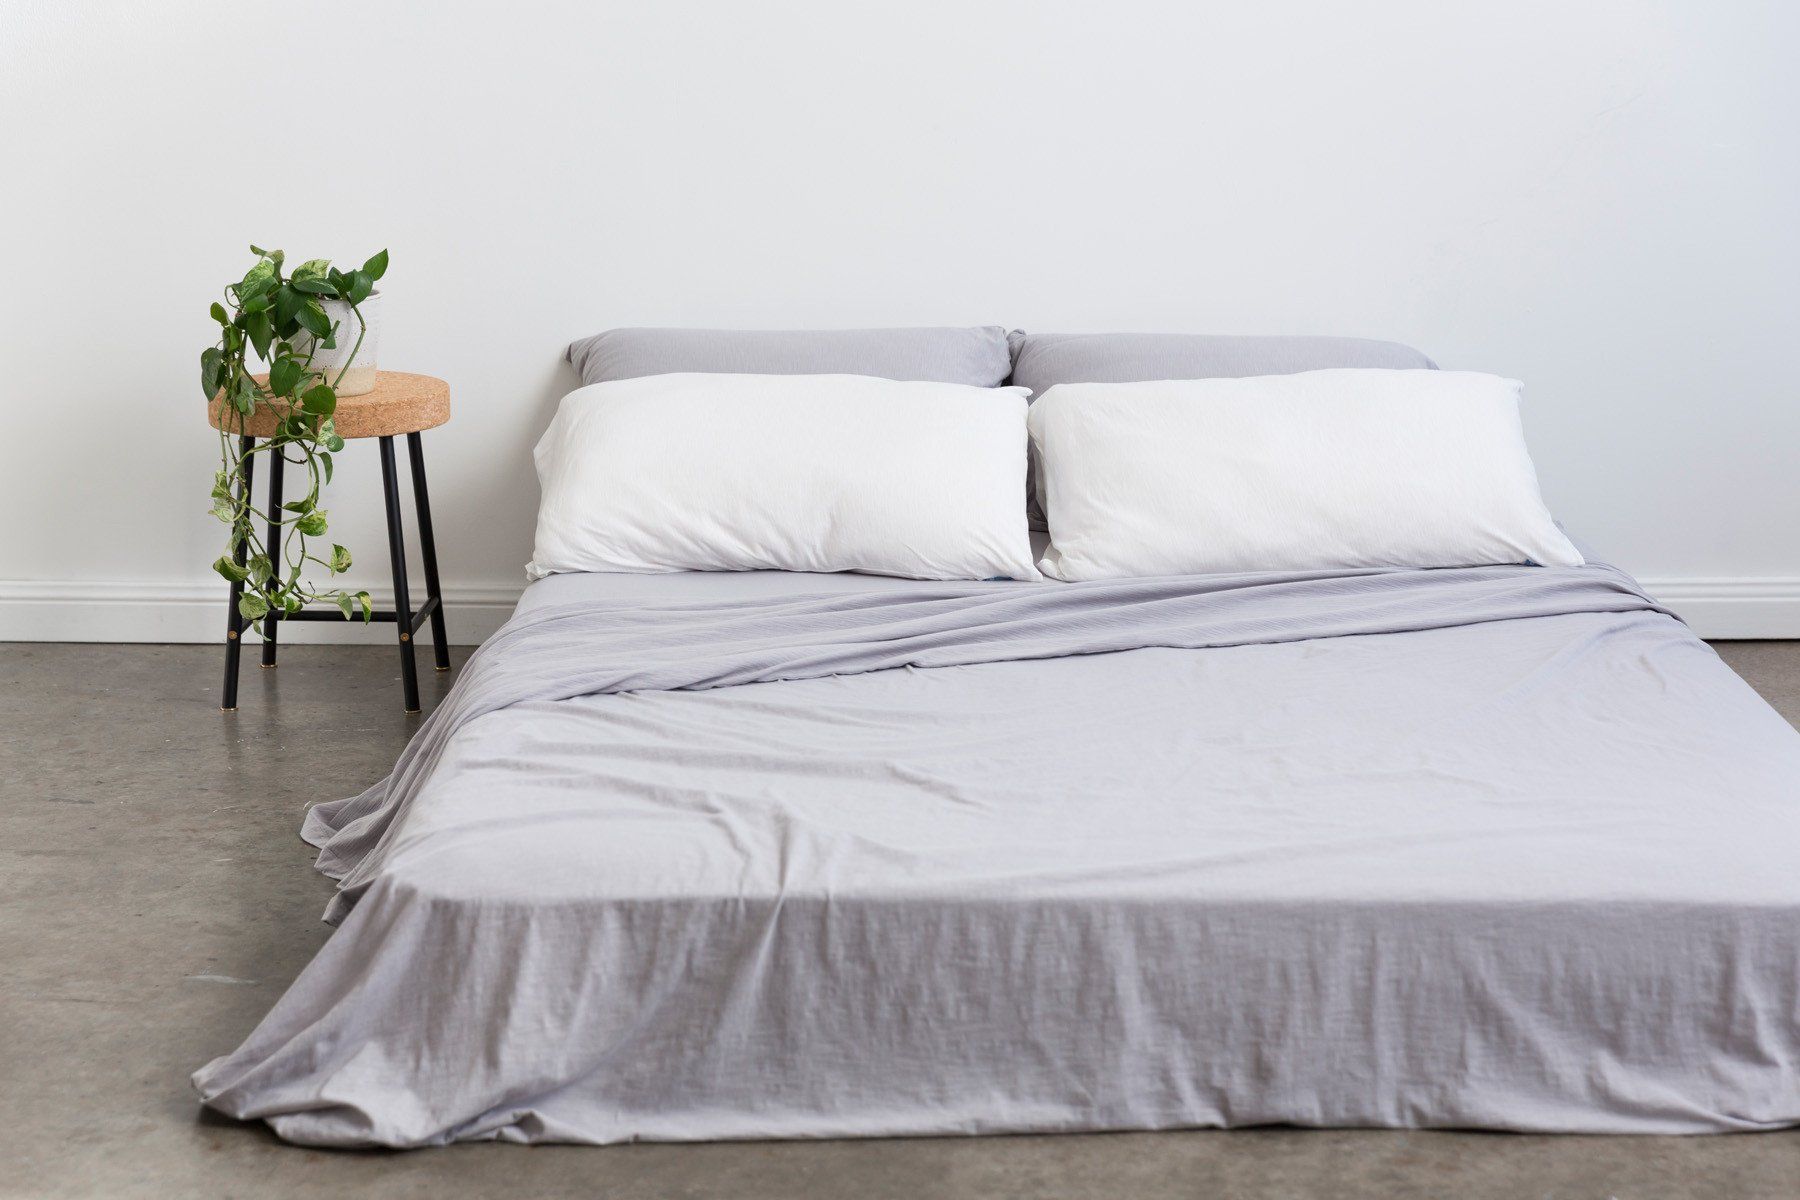 Flat Sheets vs Fitted Sheets – What’s the Difference?